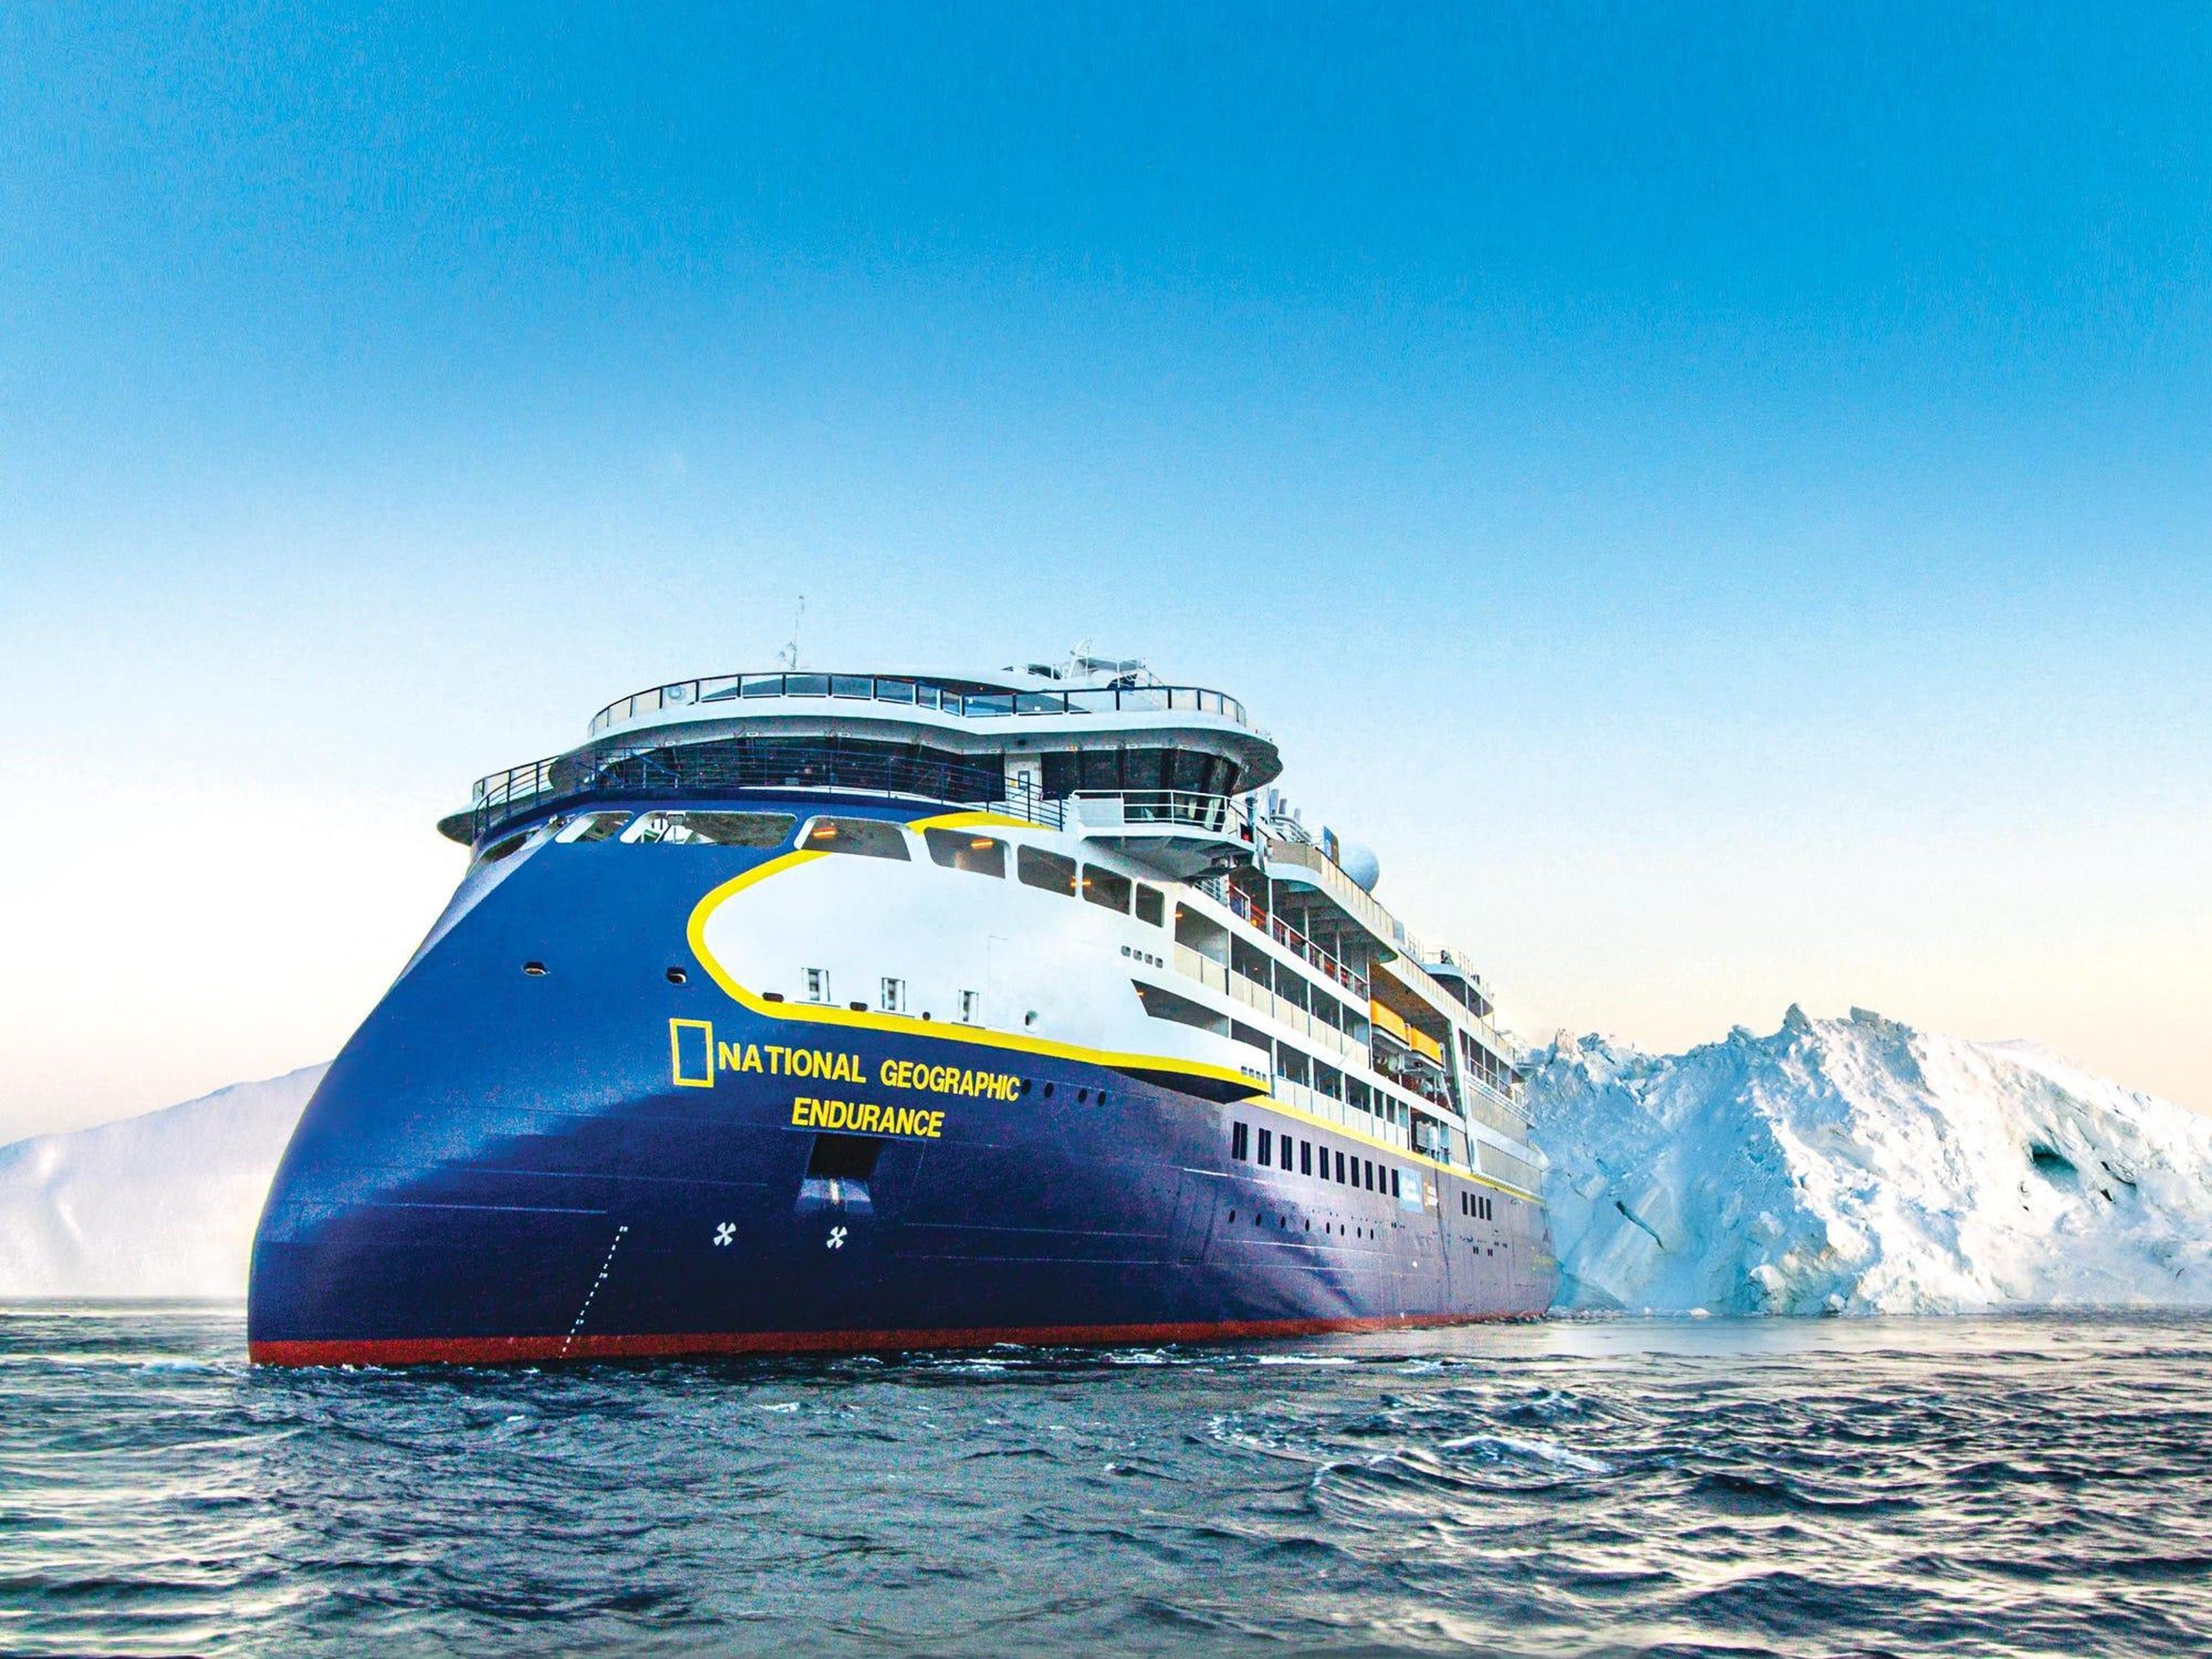 National Geographic Endurance is an arctic cruise ship.